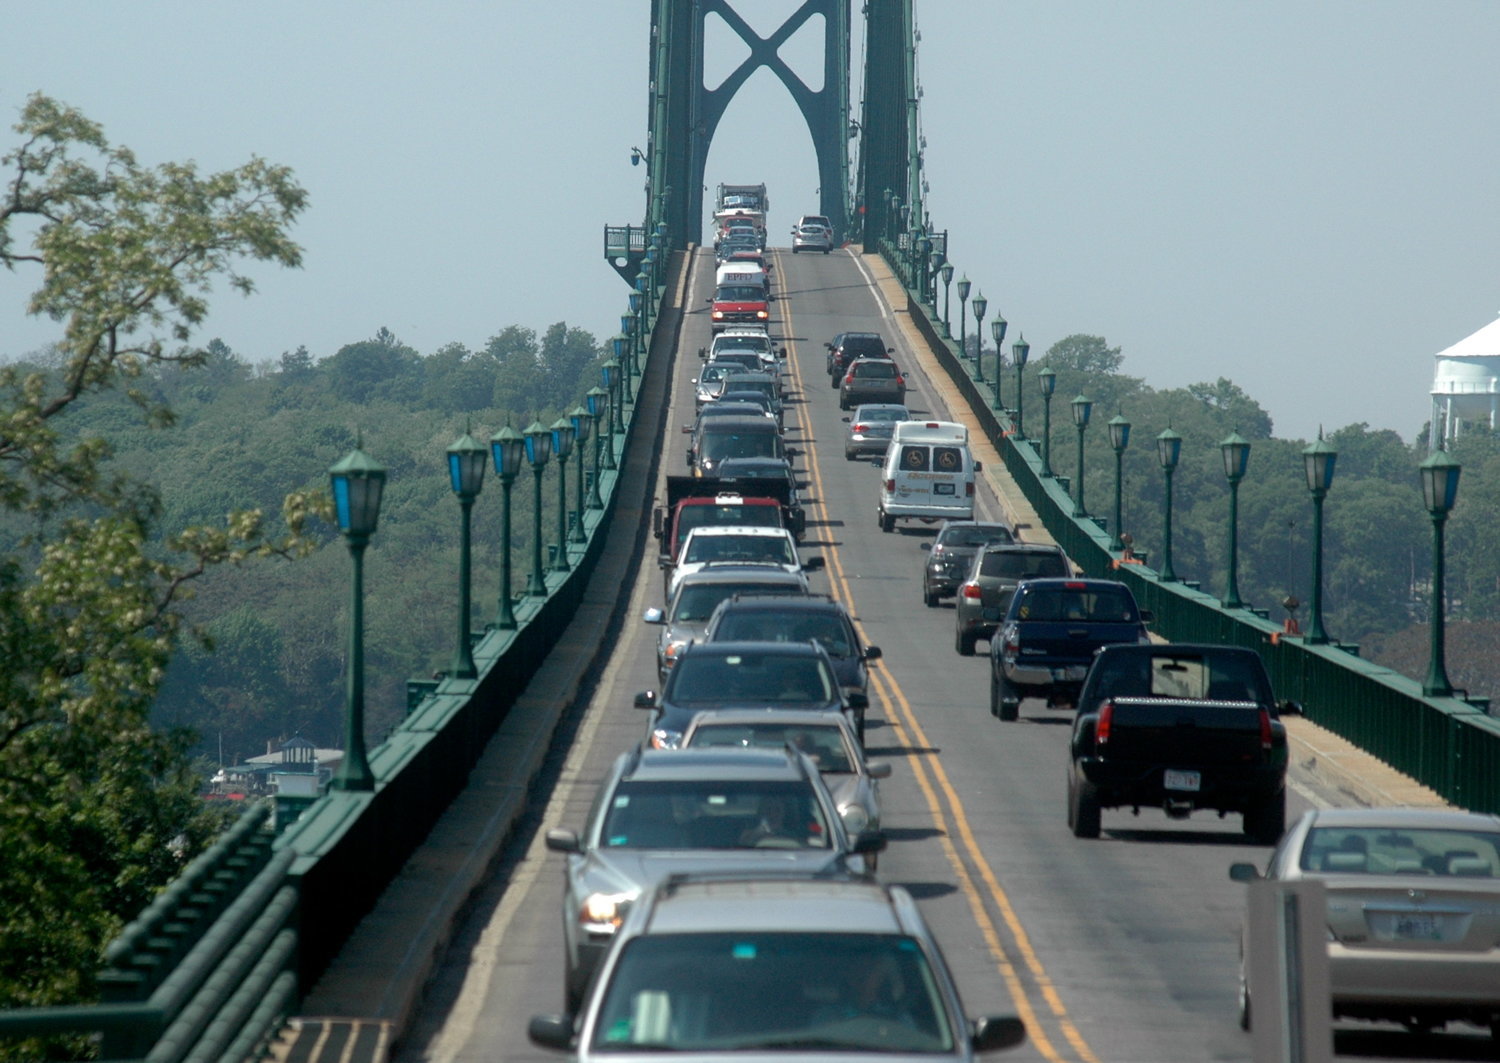 Automated license plate readers will soon be installed on both sides of the Mt. Hope Bridge to assist police in their response time to prevent suicides.